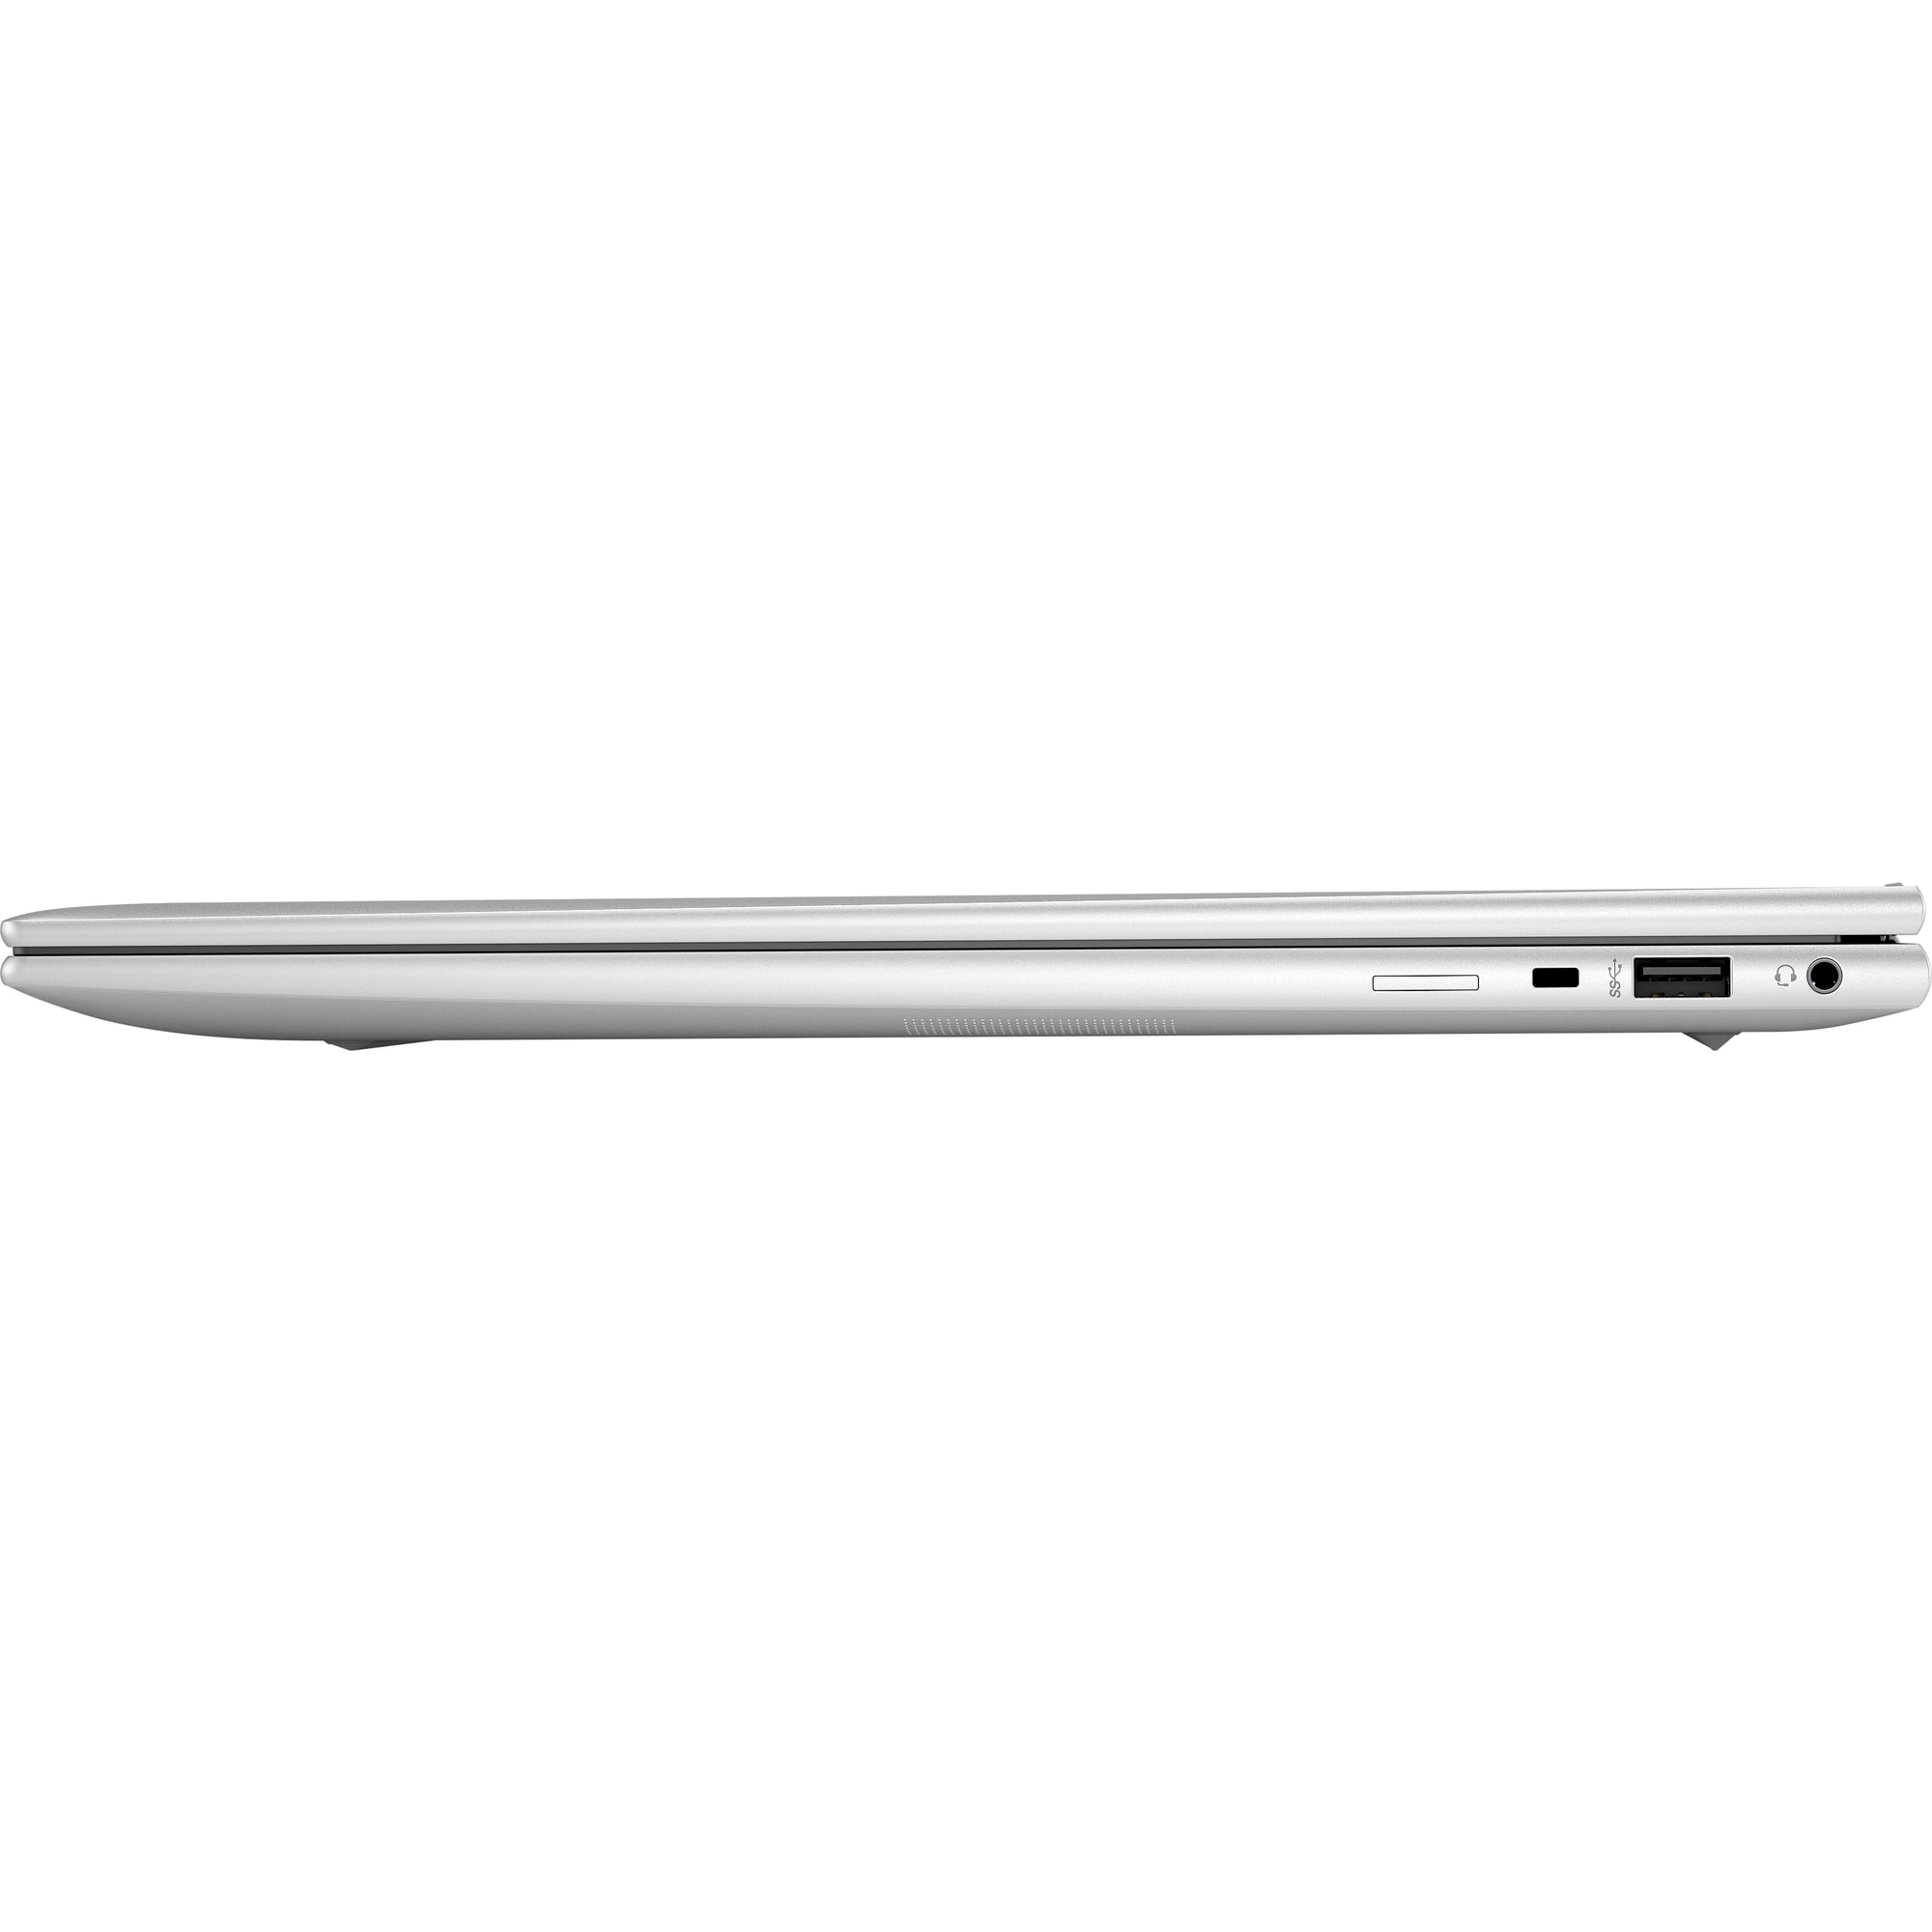 HP NTB EliteBook 860 G10 i5-1340P 16WUXGA 400 IR,  2x8GB,  512GB,  ax,  BT,  FpS,  bckl kbd,  76WHr,  Win11Pro,  3y onsite7 